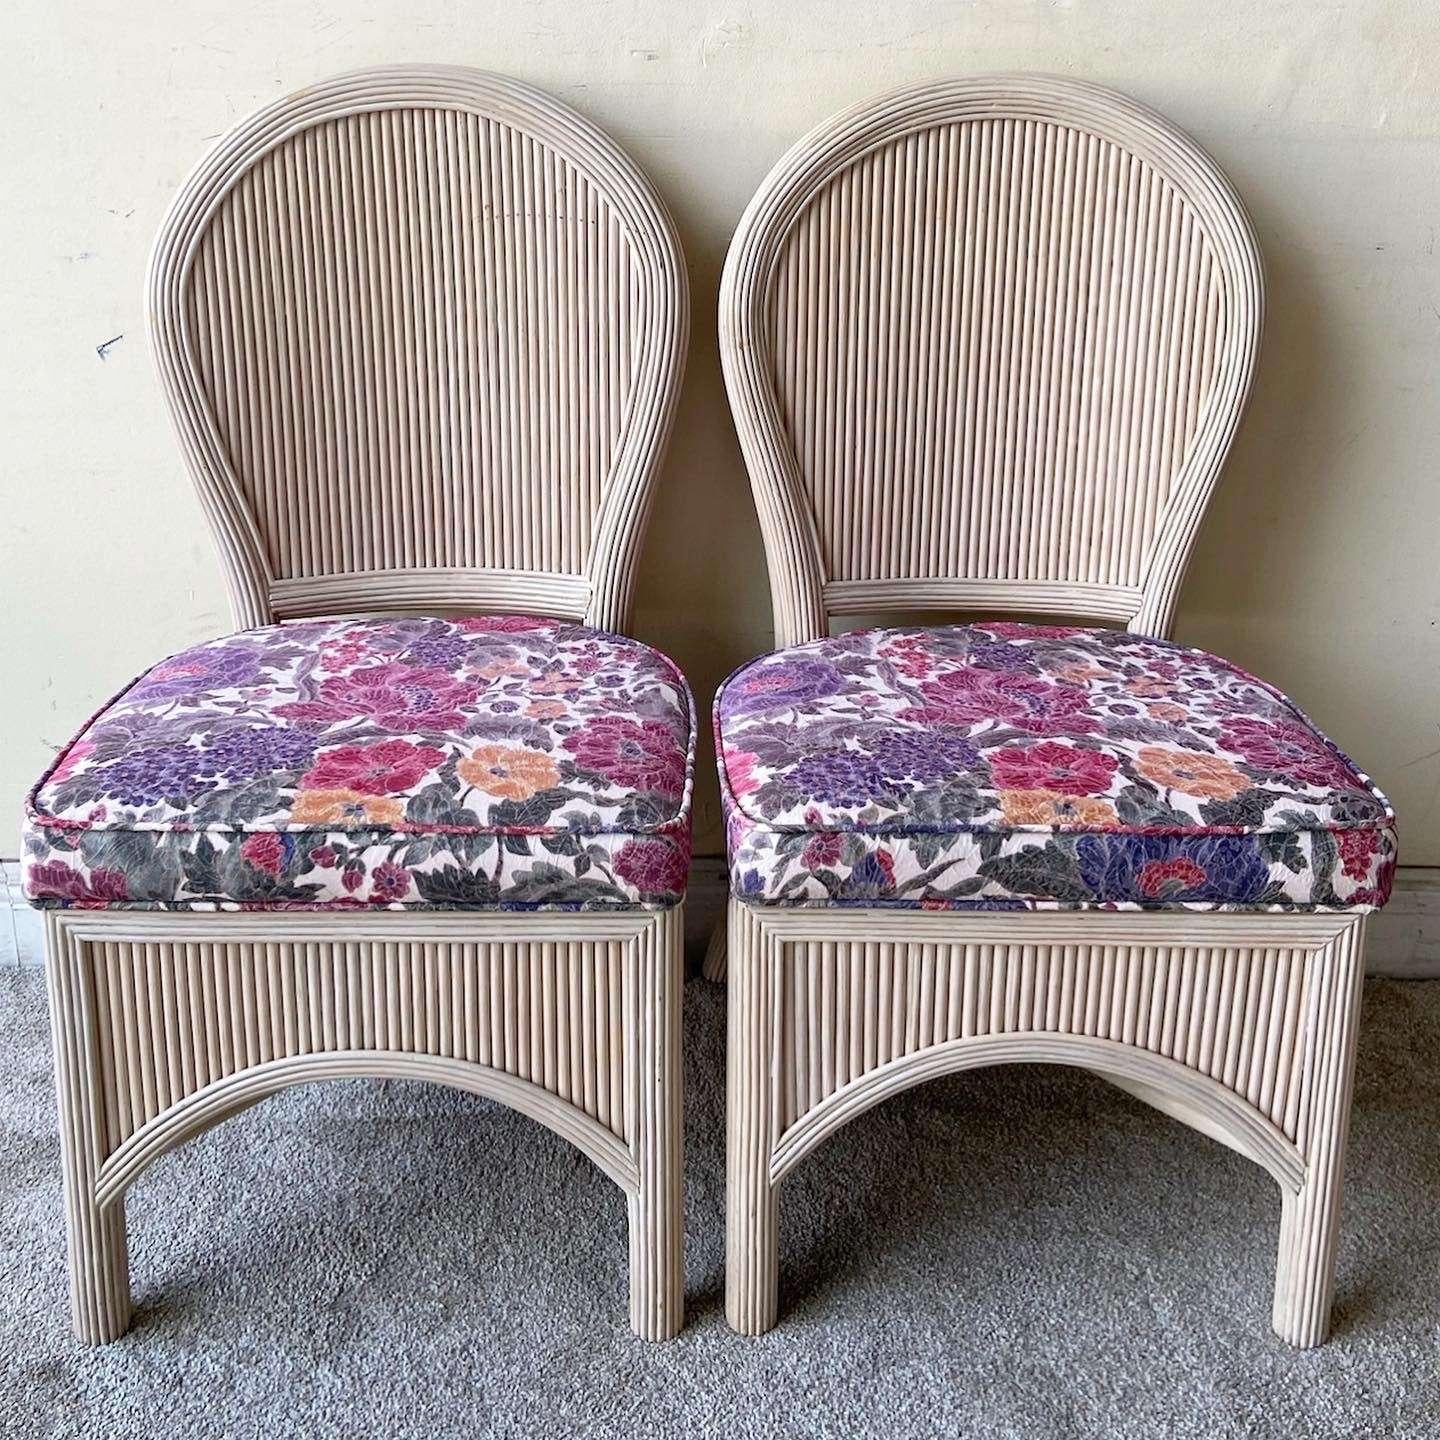 Exceptional set of 4 pencil reed dining chairs. Each feature purple floral seat cushion with a partially skirted pencil reed base.

Seat height is 18.0 in